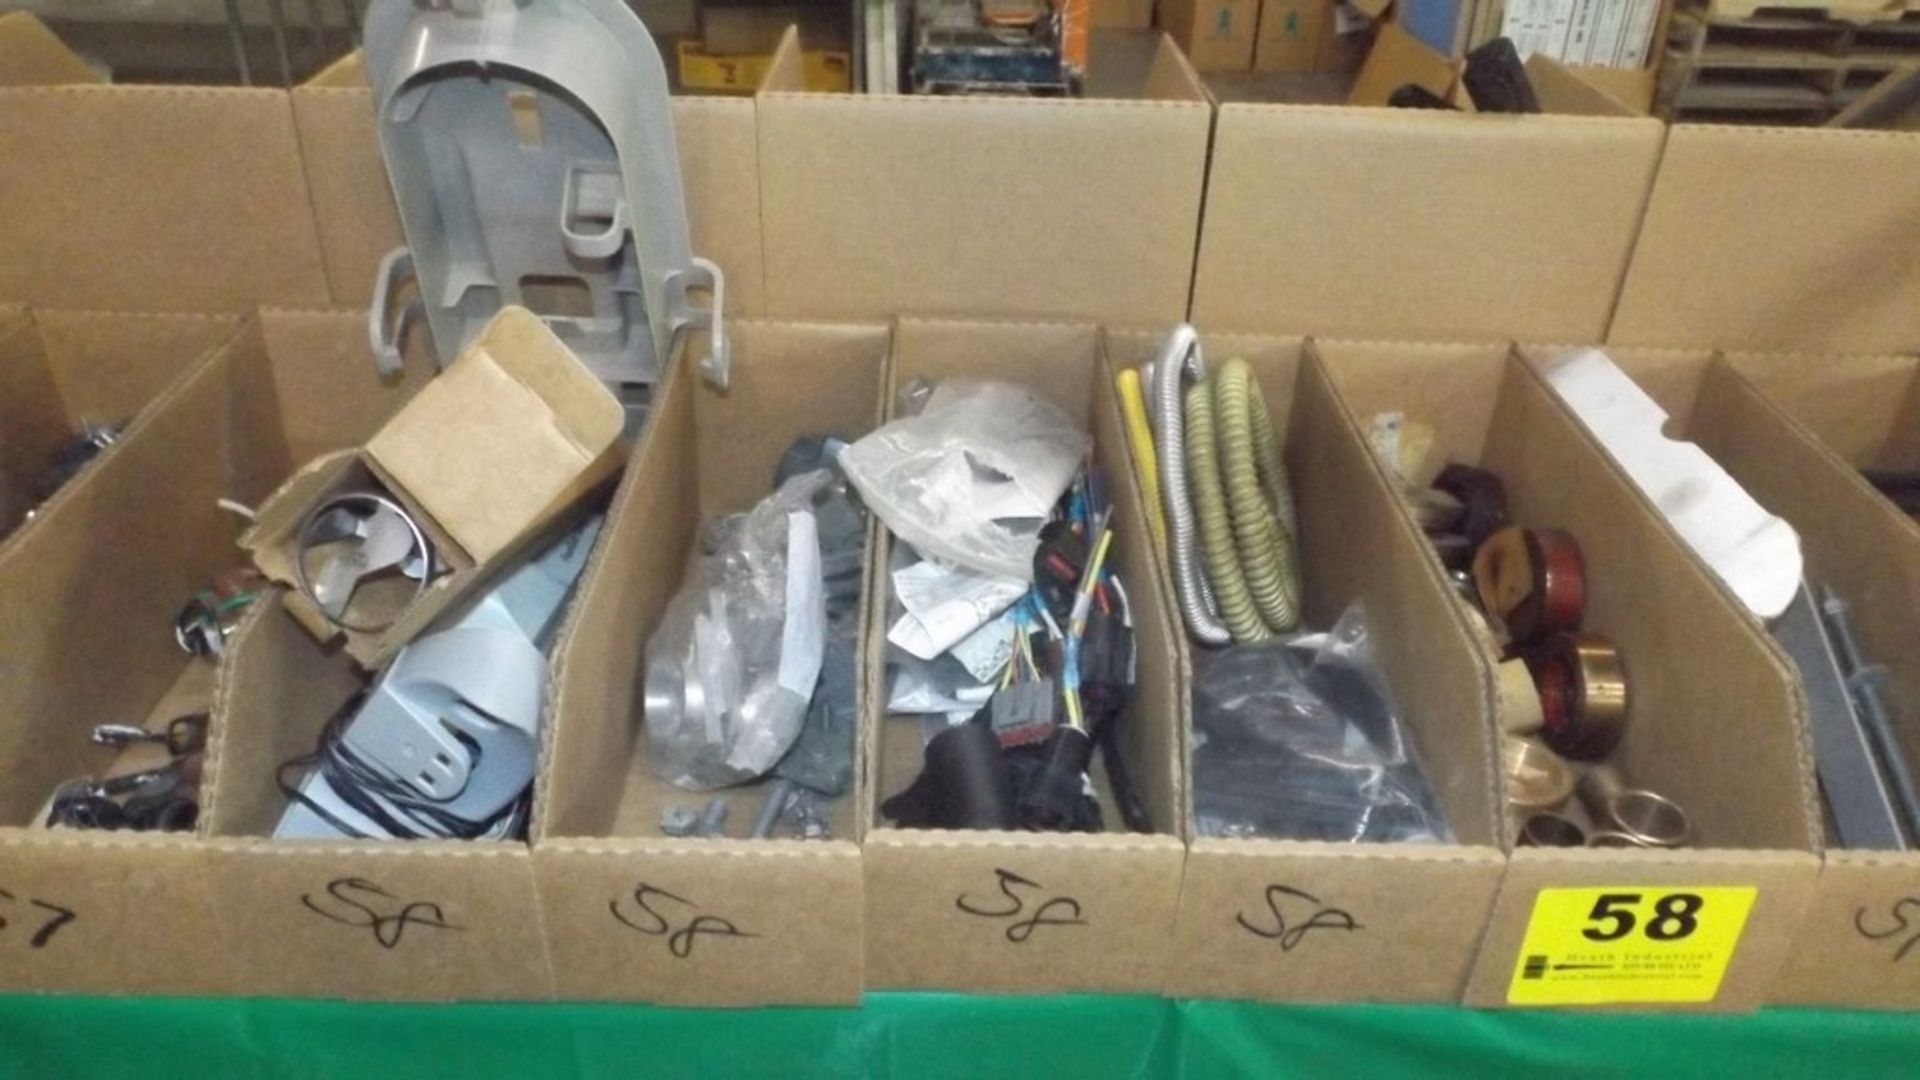 BOXES OF HARDWARE, BRASS FITTINGS, GAS HOSES, WIRING HARNESSES, HANGES AND DOOR CLOSERS - Image 2 of 3